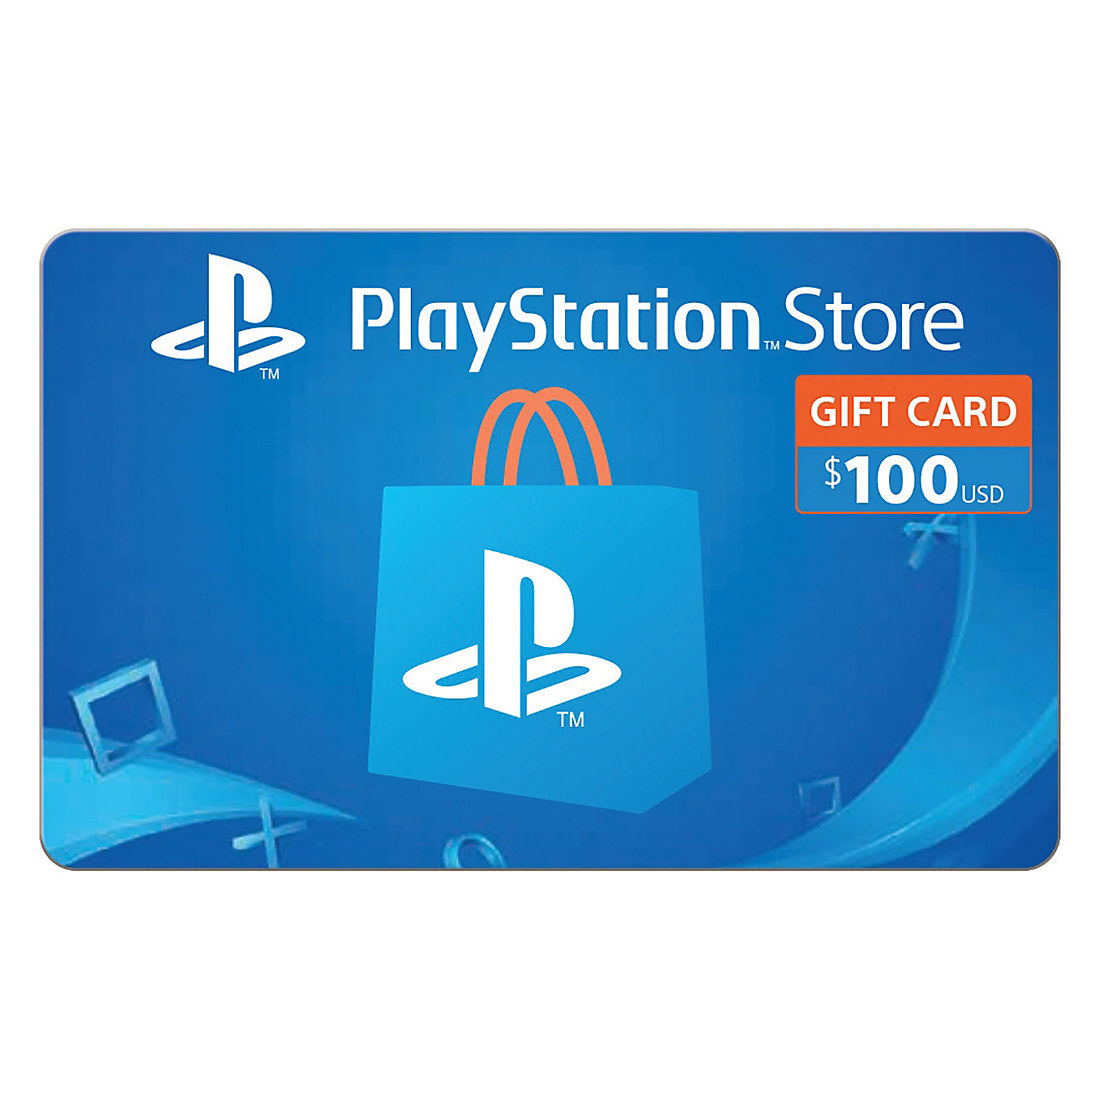 ale prototype Sved $100 PlayStation Store Gift Card - BJs Wholesale Club